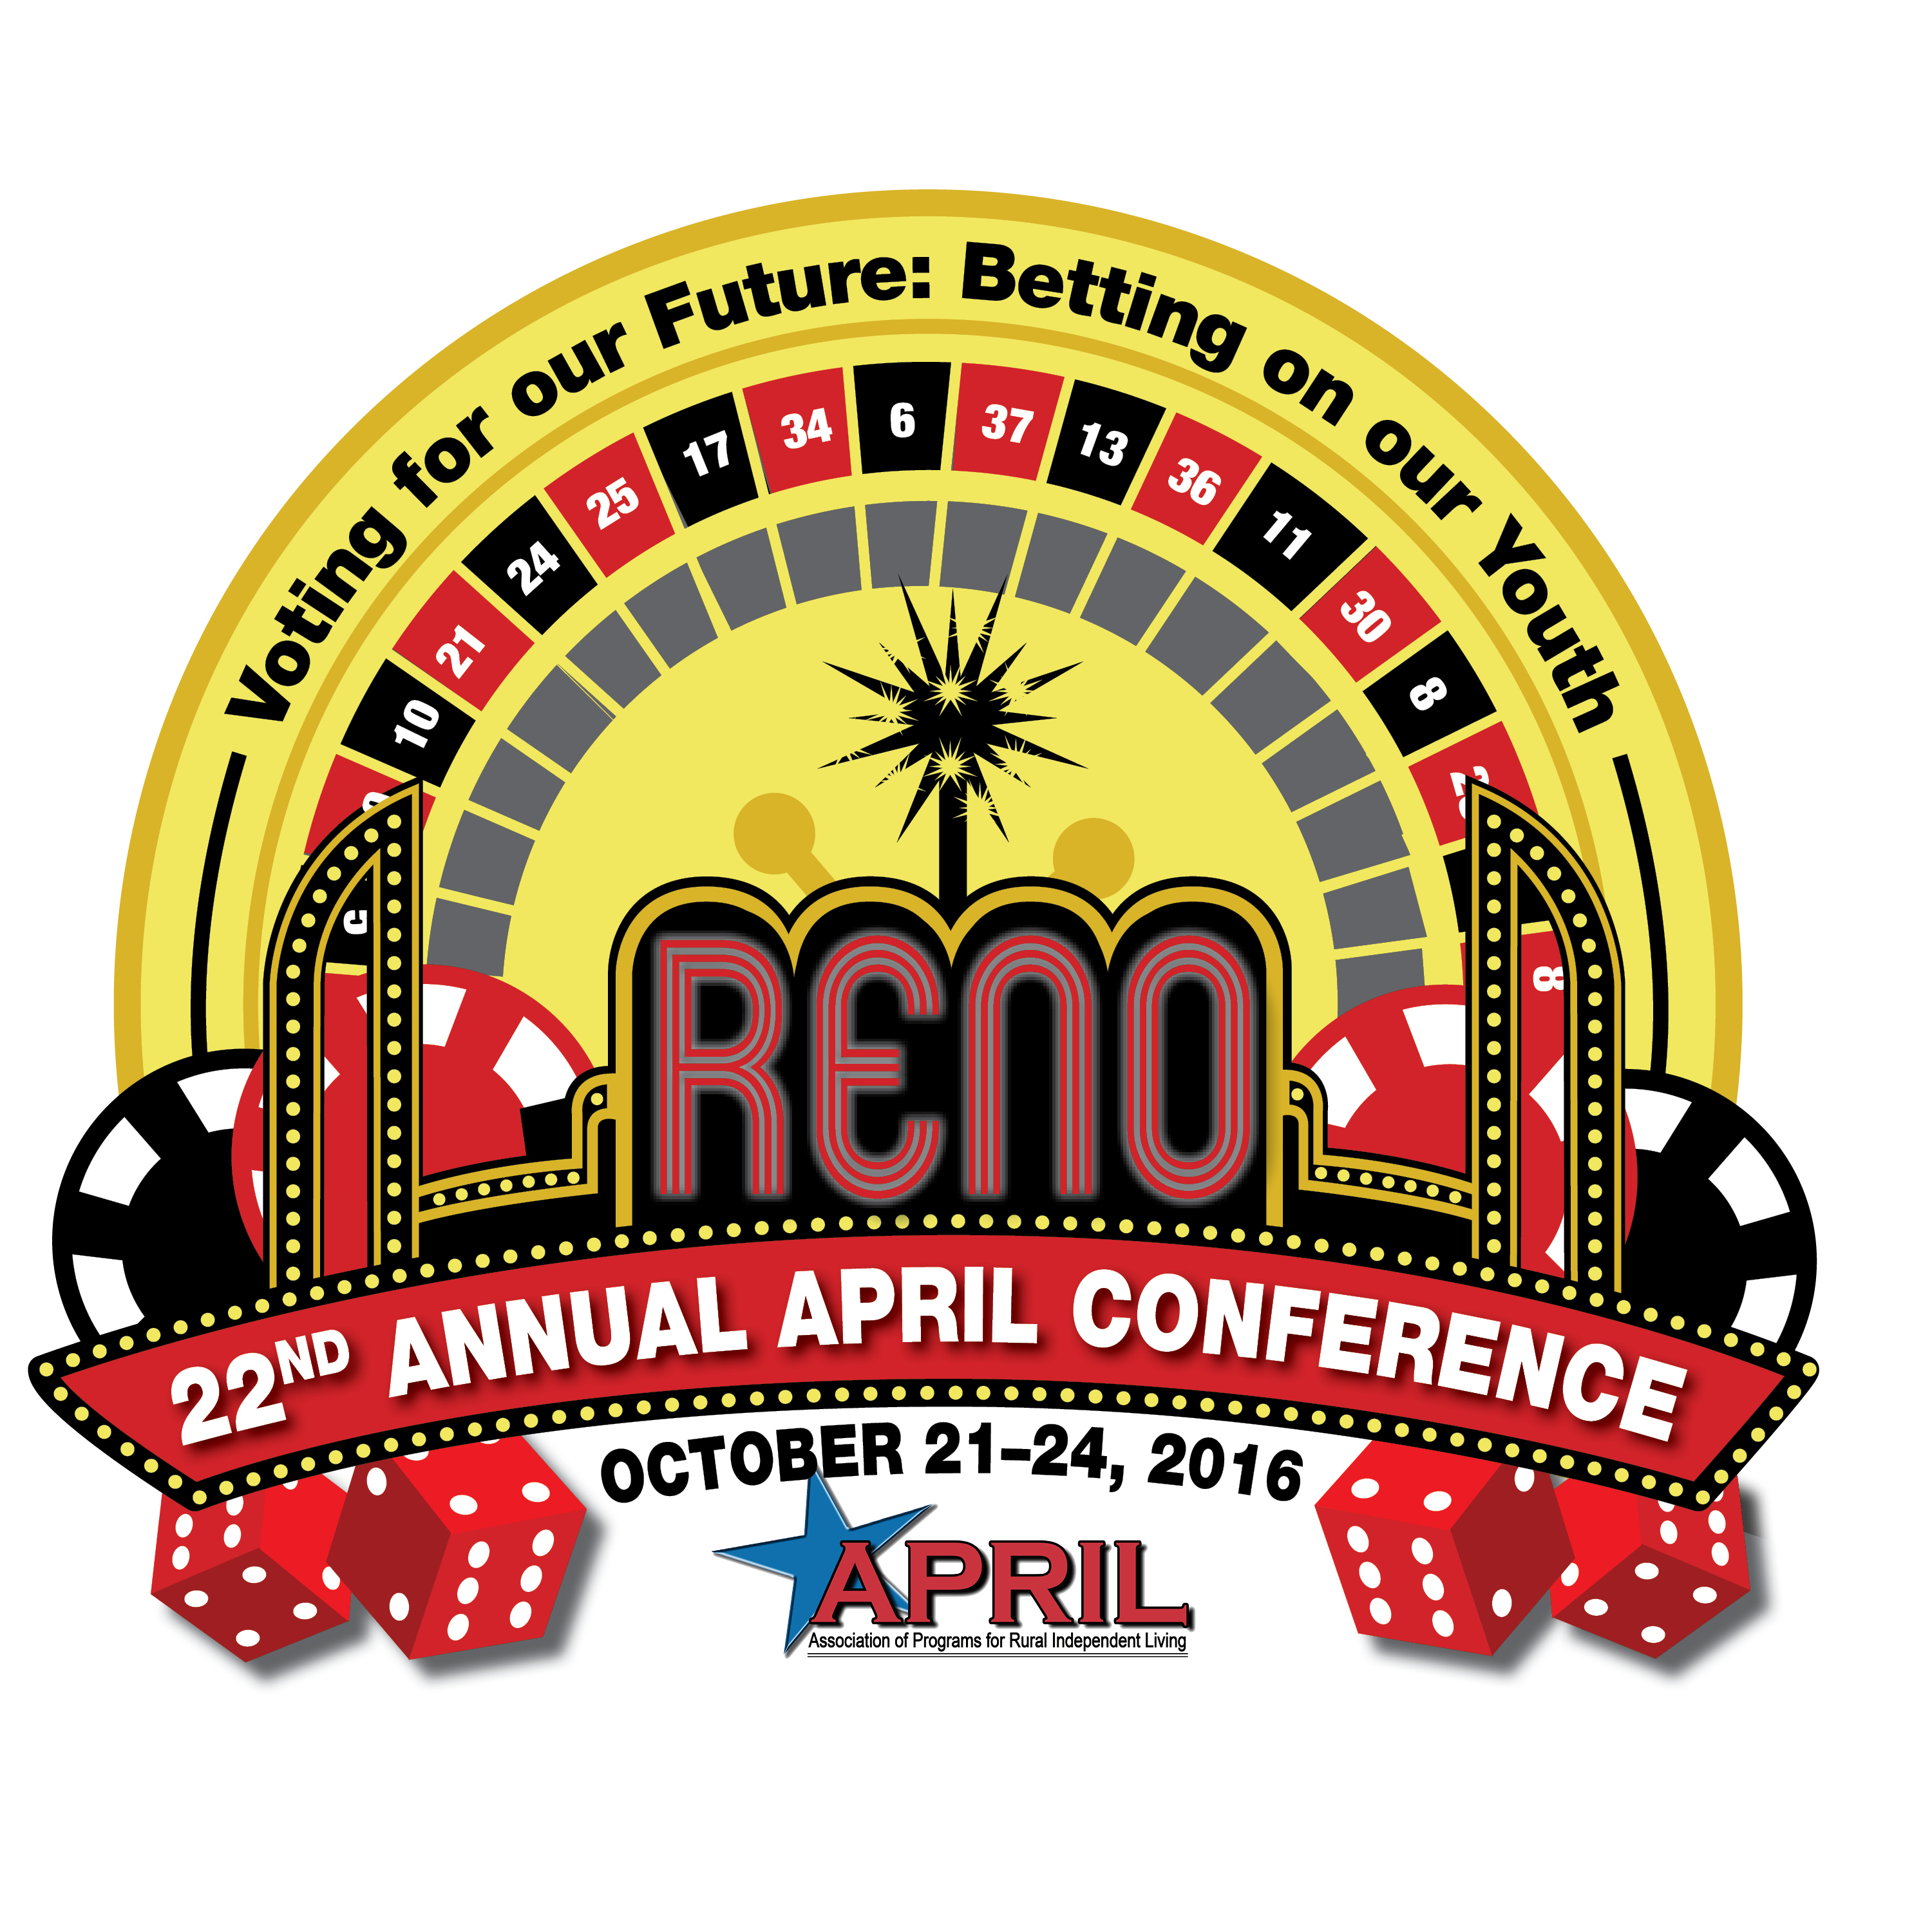 Roulette Wheel with RENO in middle Betting on the youth APRIL 22nd annual conference October 21-24